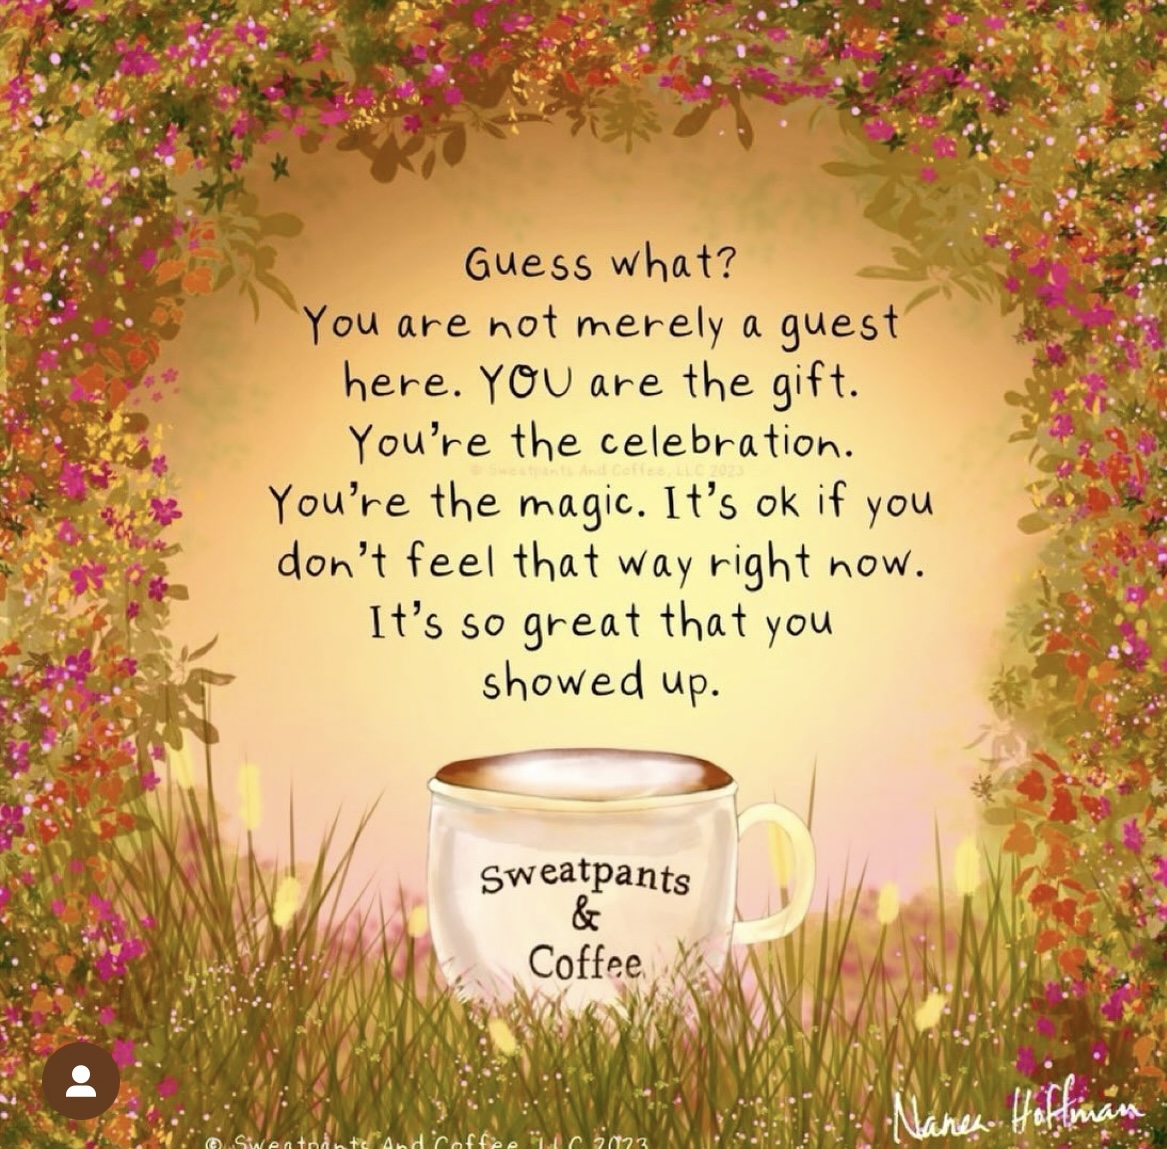 You are a gift 💕
#bcsm #breastcancer #inspirationalquotes